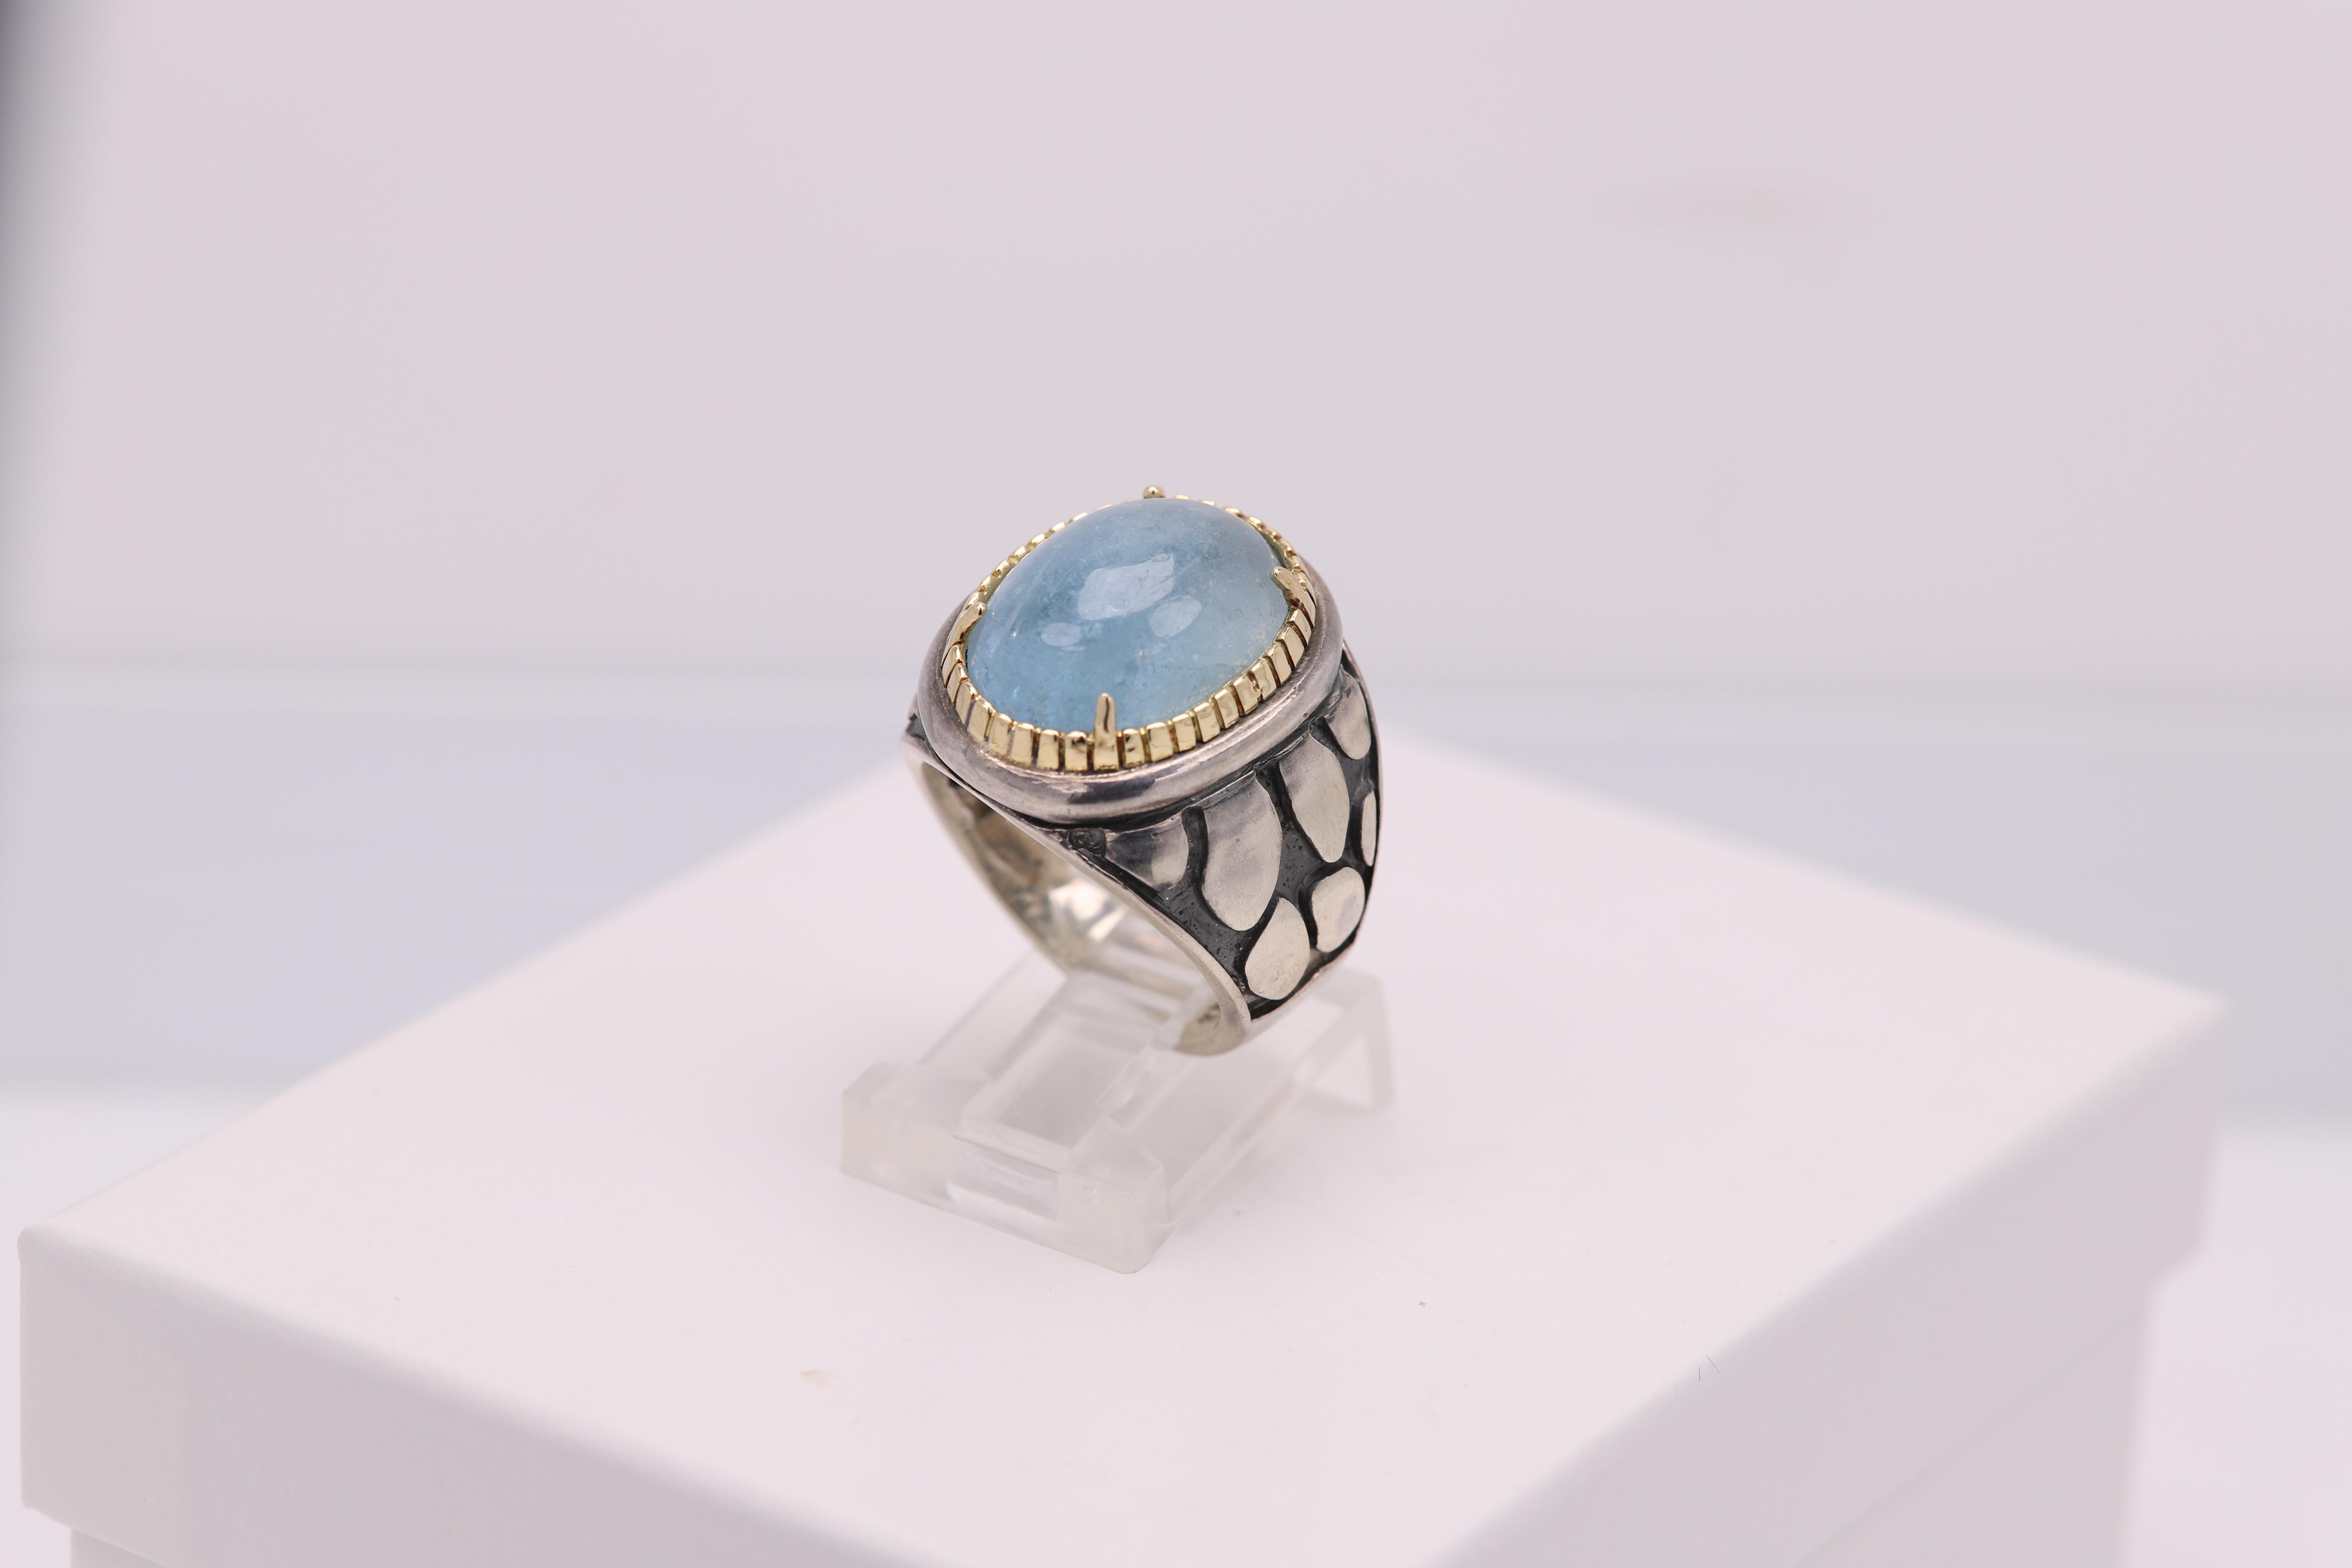 Vintage Brilliant Aquamarine stone
Natural Stone and Cabochon cut.
Approx size 16 x 12 mm
Mostly Sterling Silver 925 and the Bezel is solid 18k yellow Gold
Well craftsmanship - made in Italy
Finger size 6 (can be re-sized)
Overall weight is 13.40